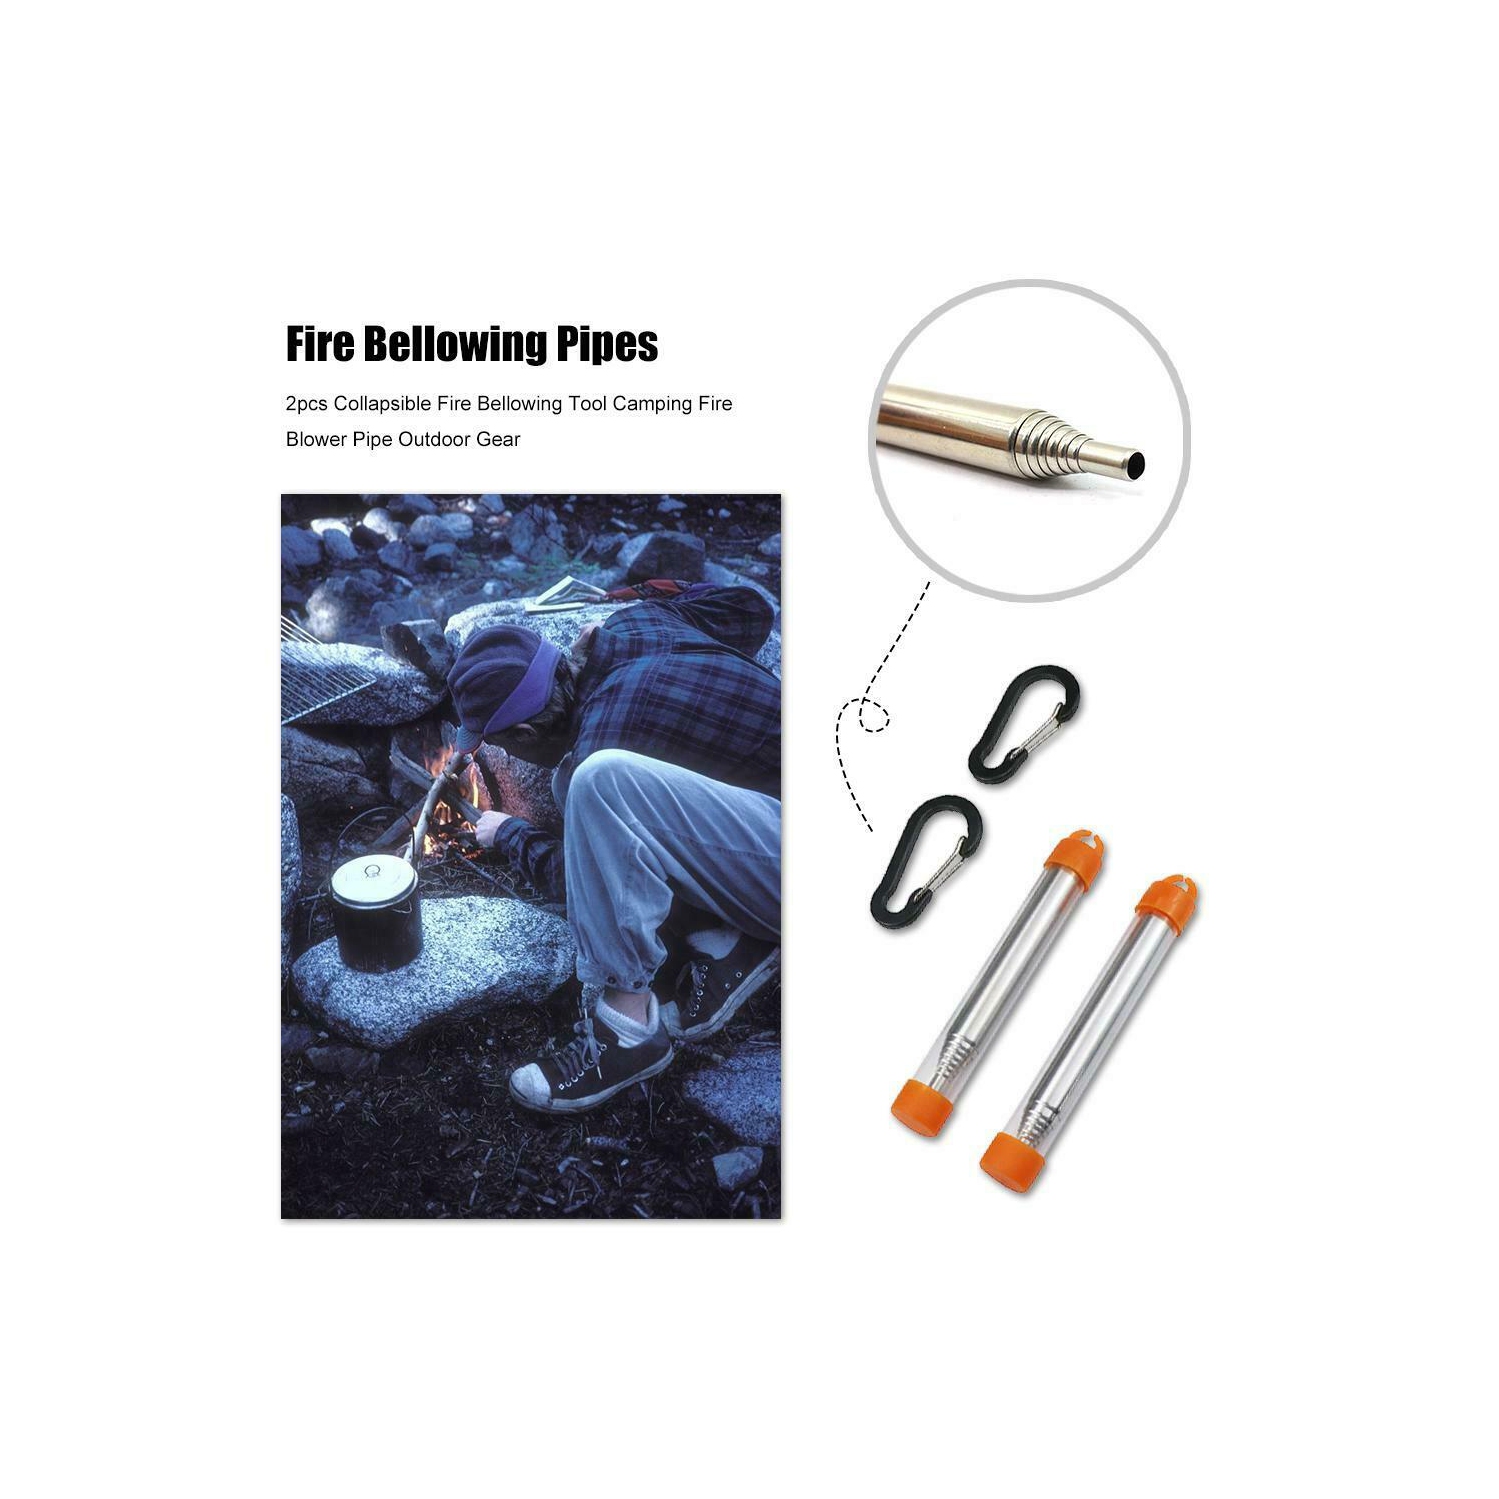 Collapsible Fire Bellowing Tool Outdoor Camping Gear Fire Blower Pipes Pack  2